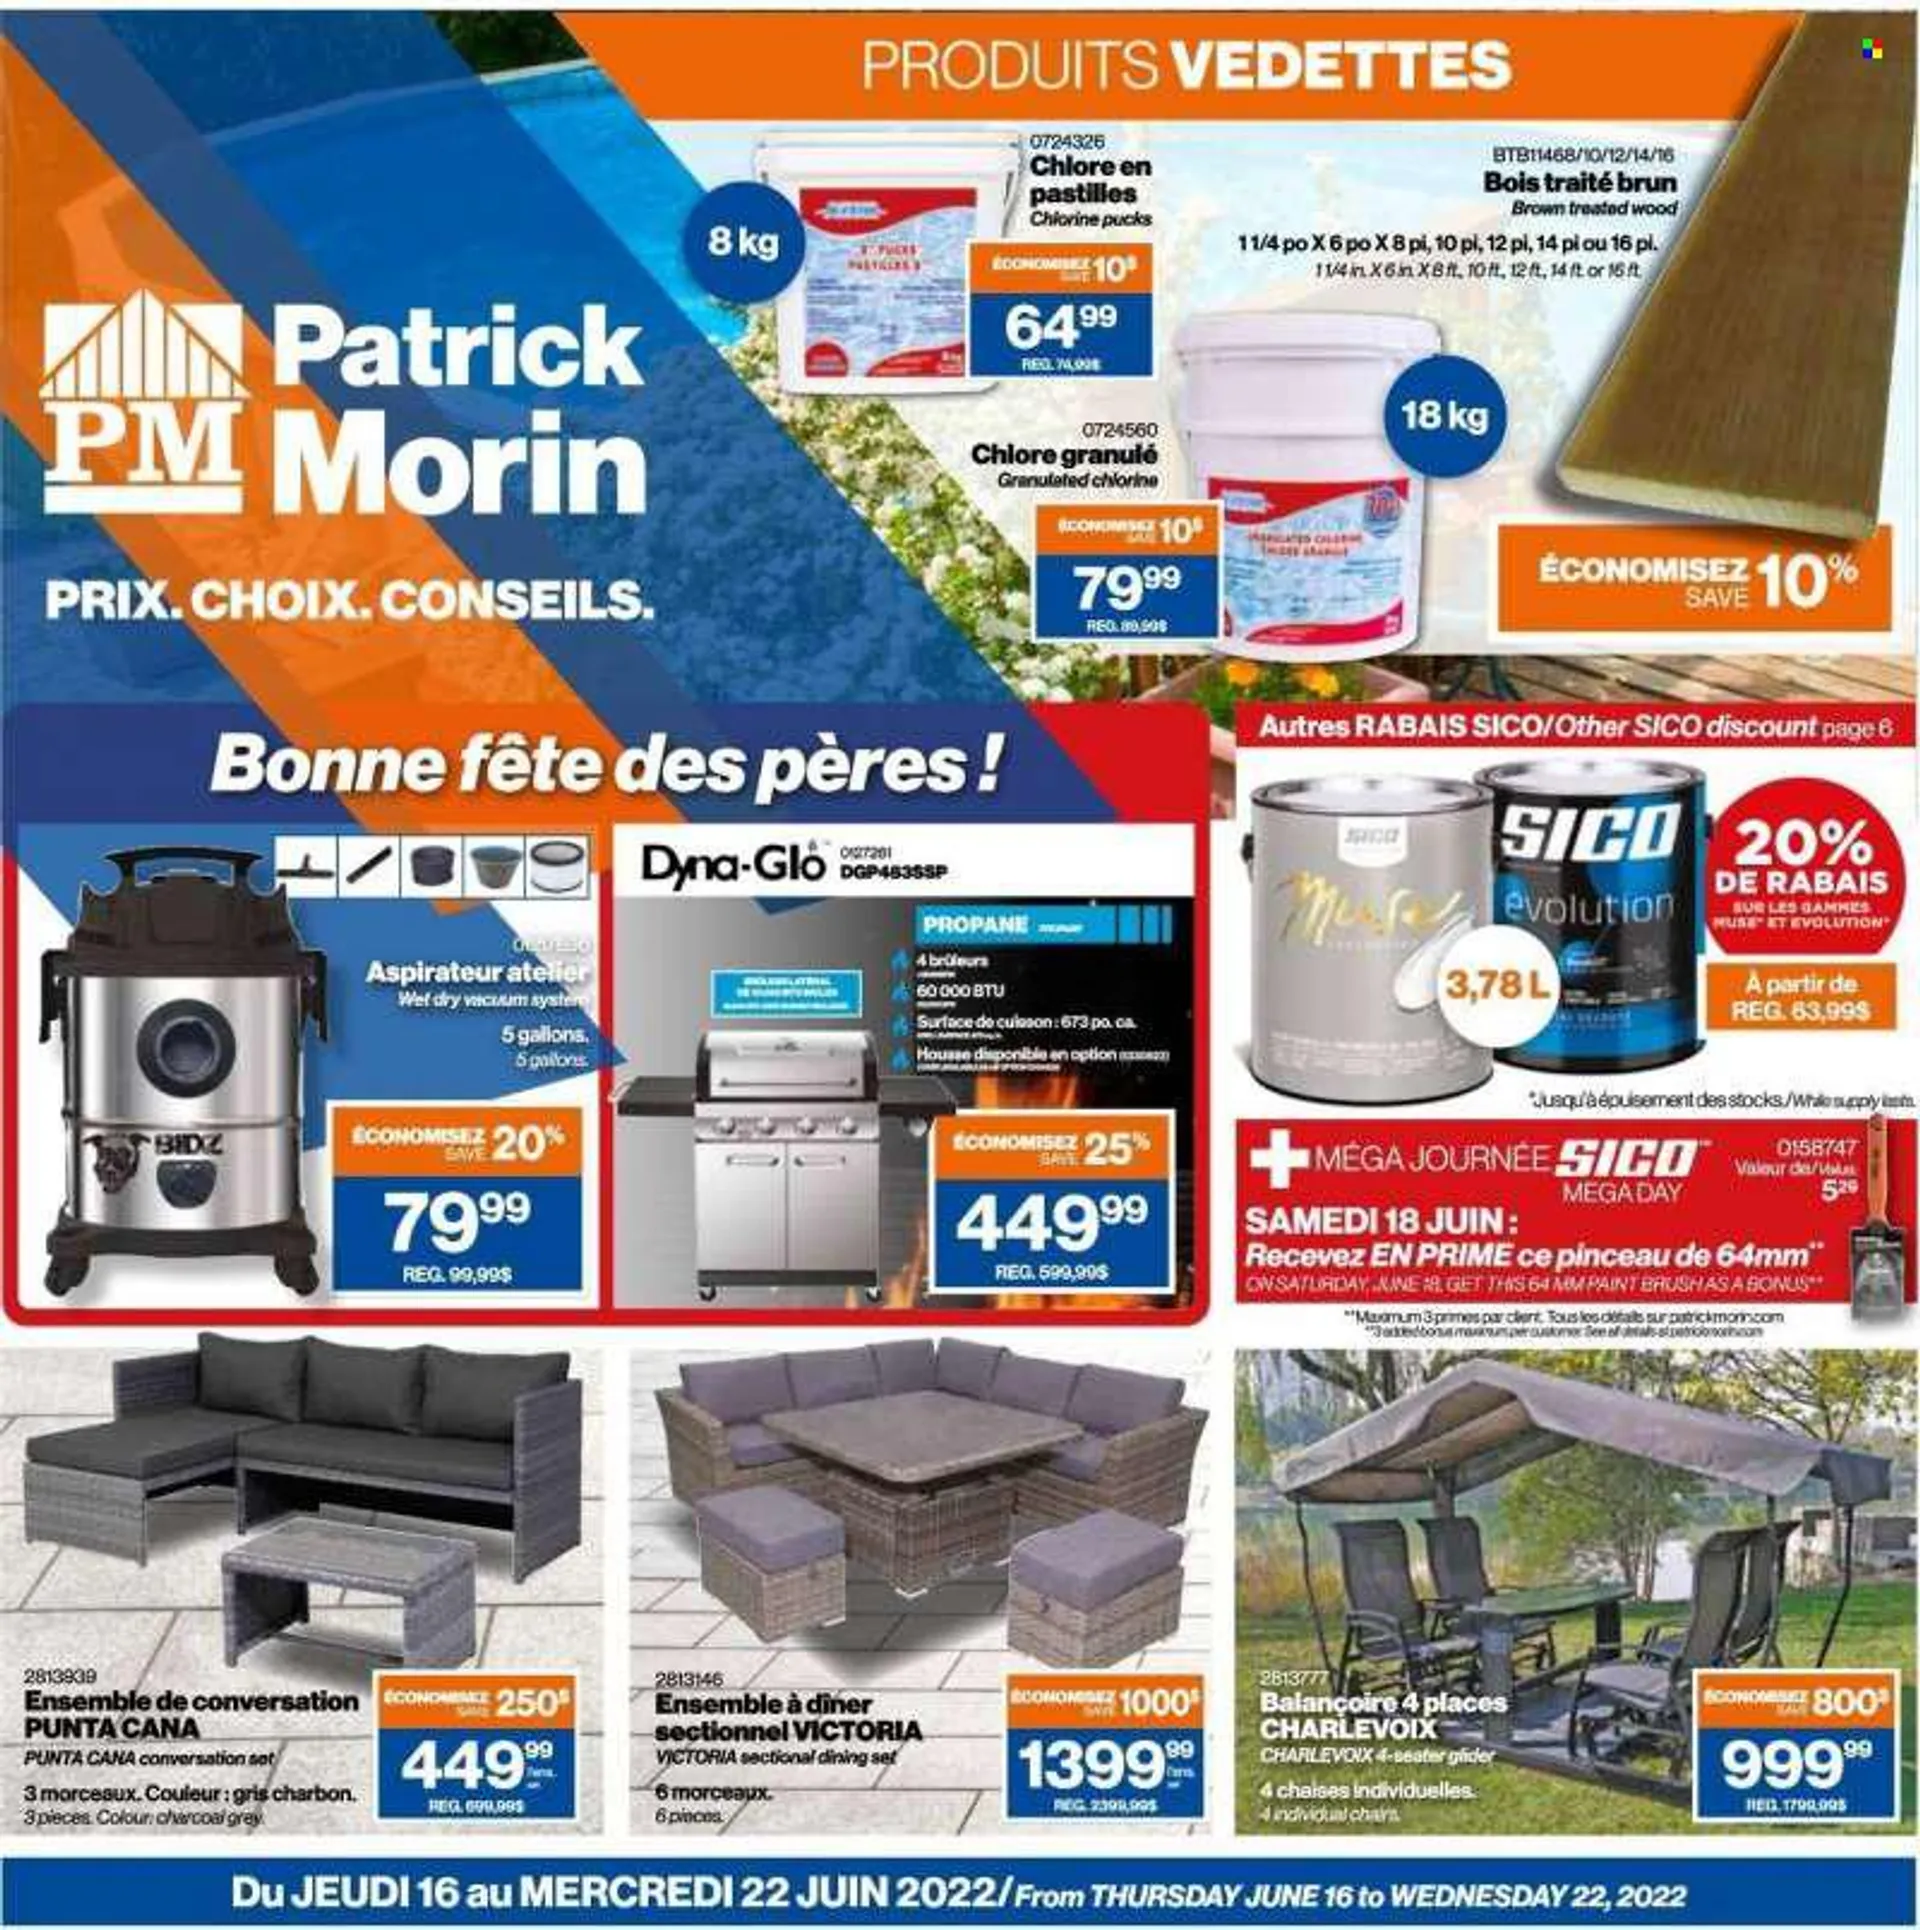 Patrick Morin Flyer - June 16, 2022 - June 22, 2022 - Sales products - paint brush, dining set, chair. Page 1.